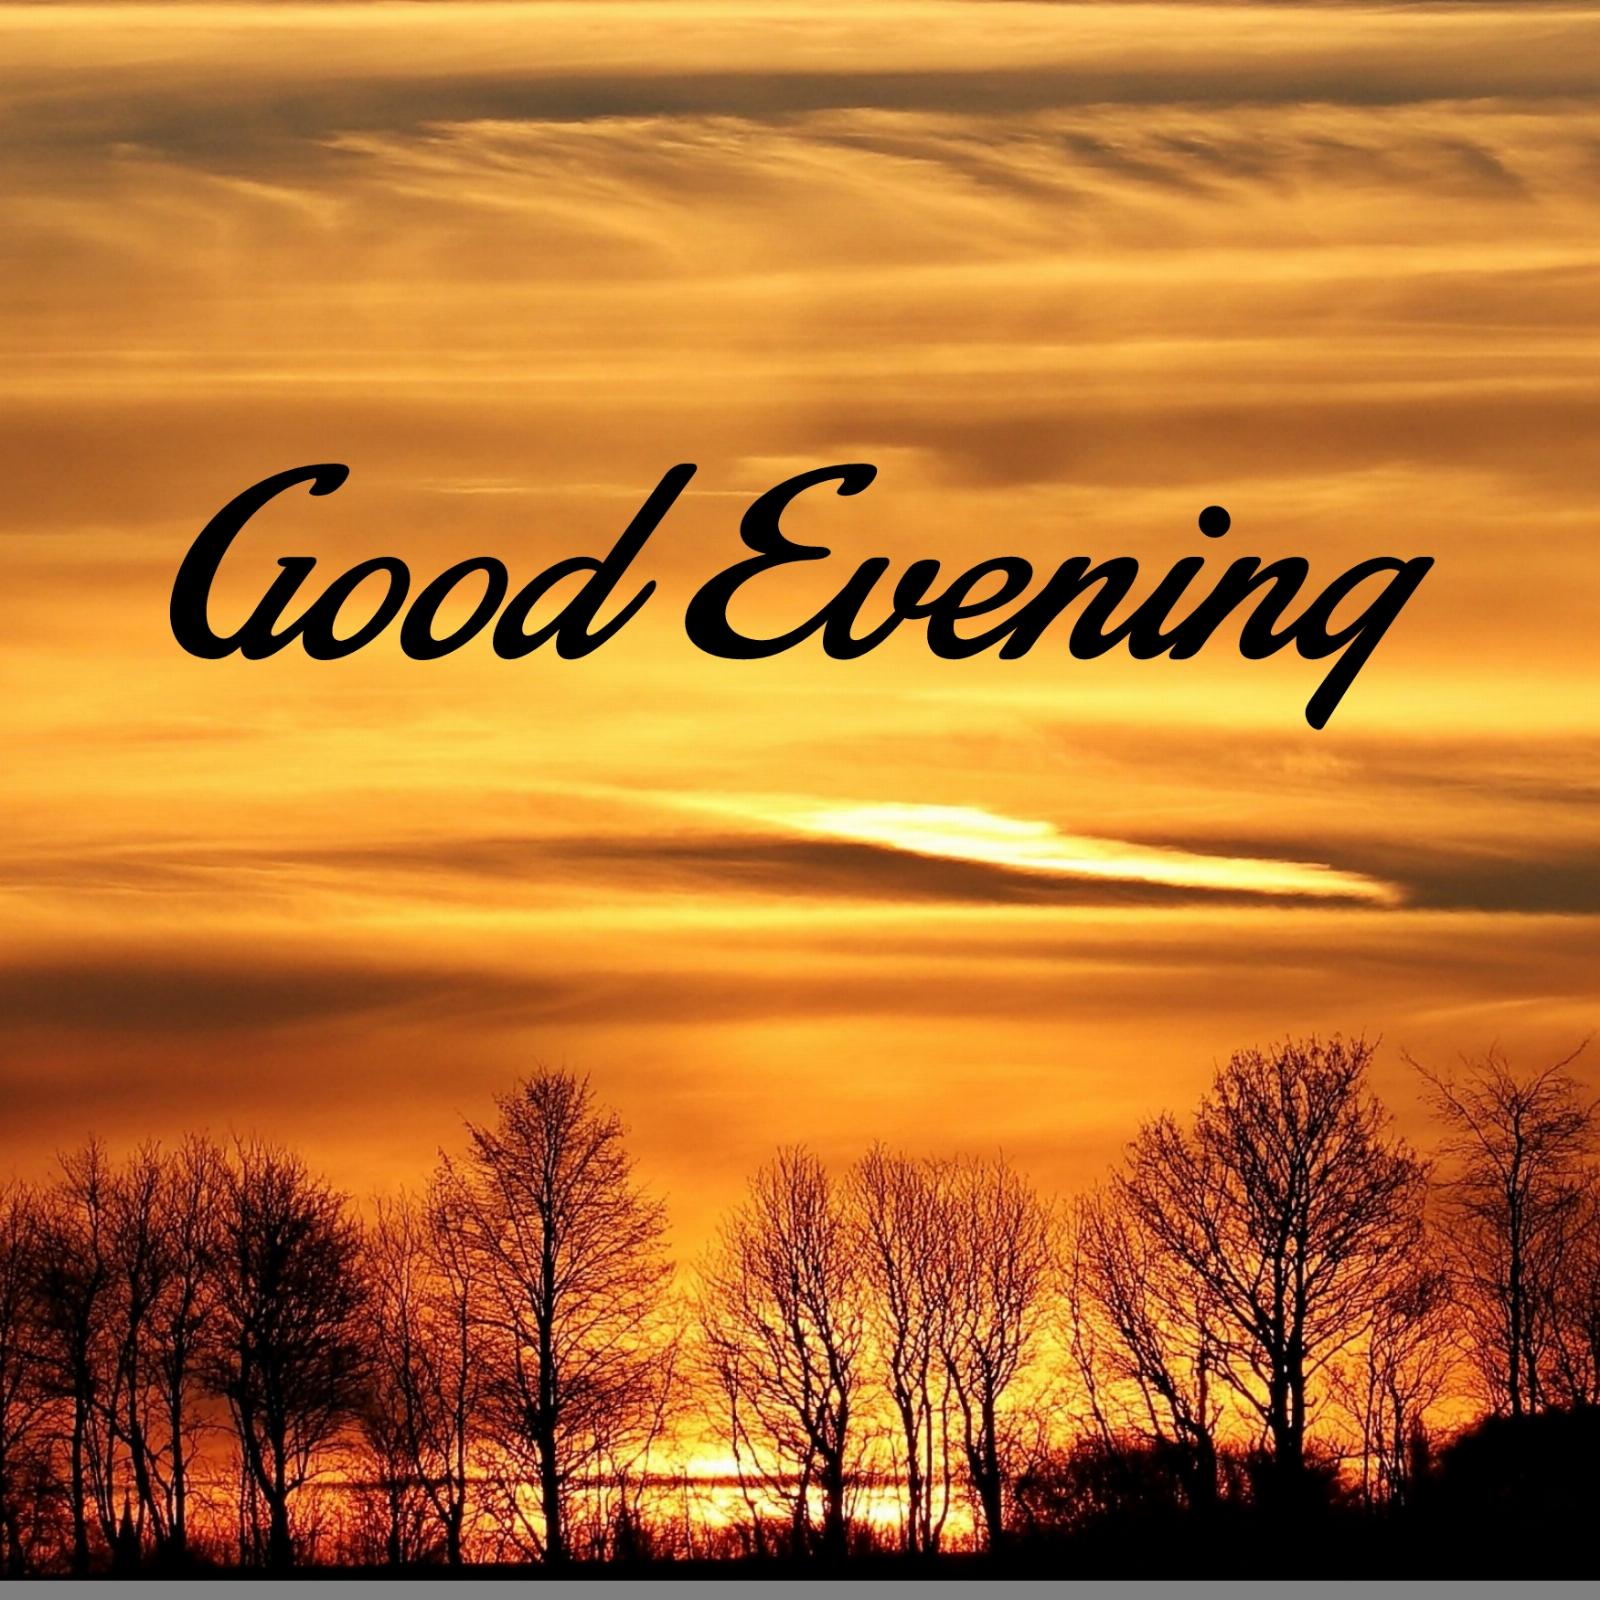 Evening Wishes Images